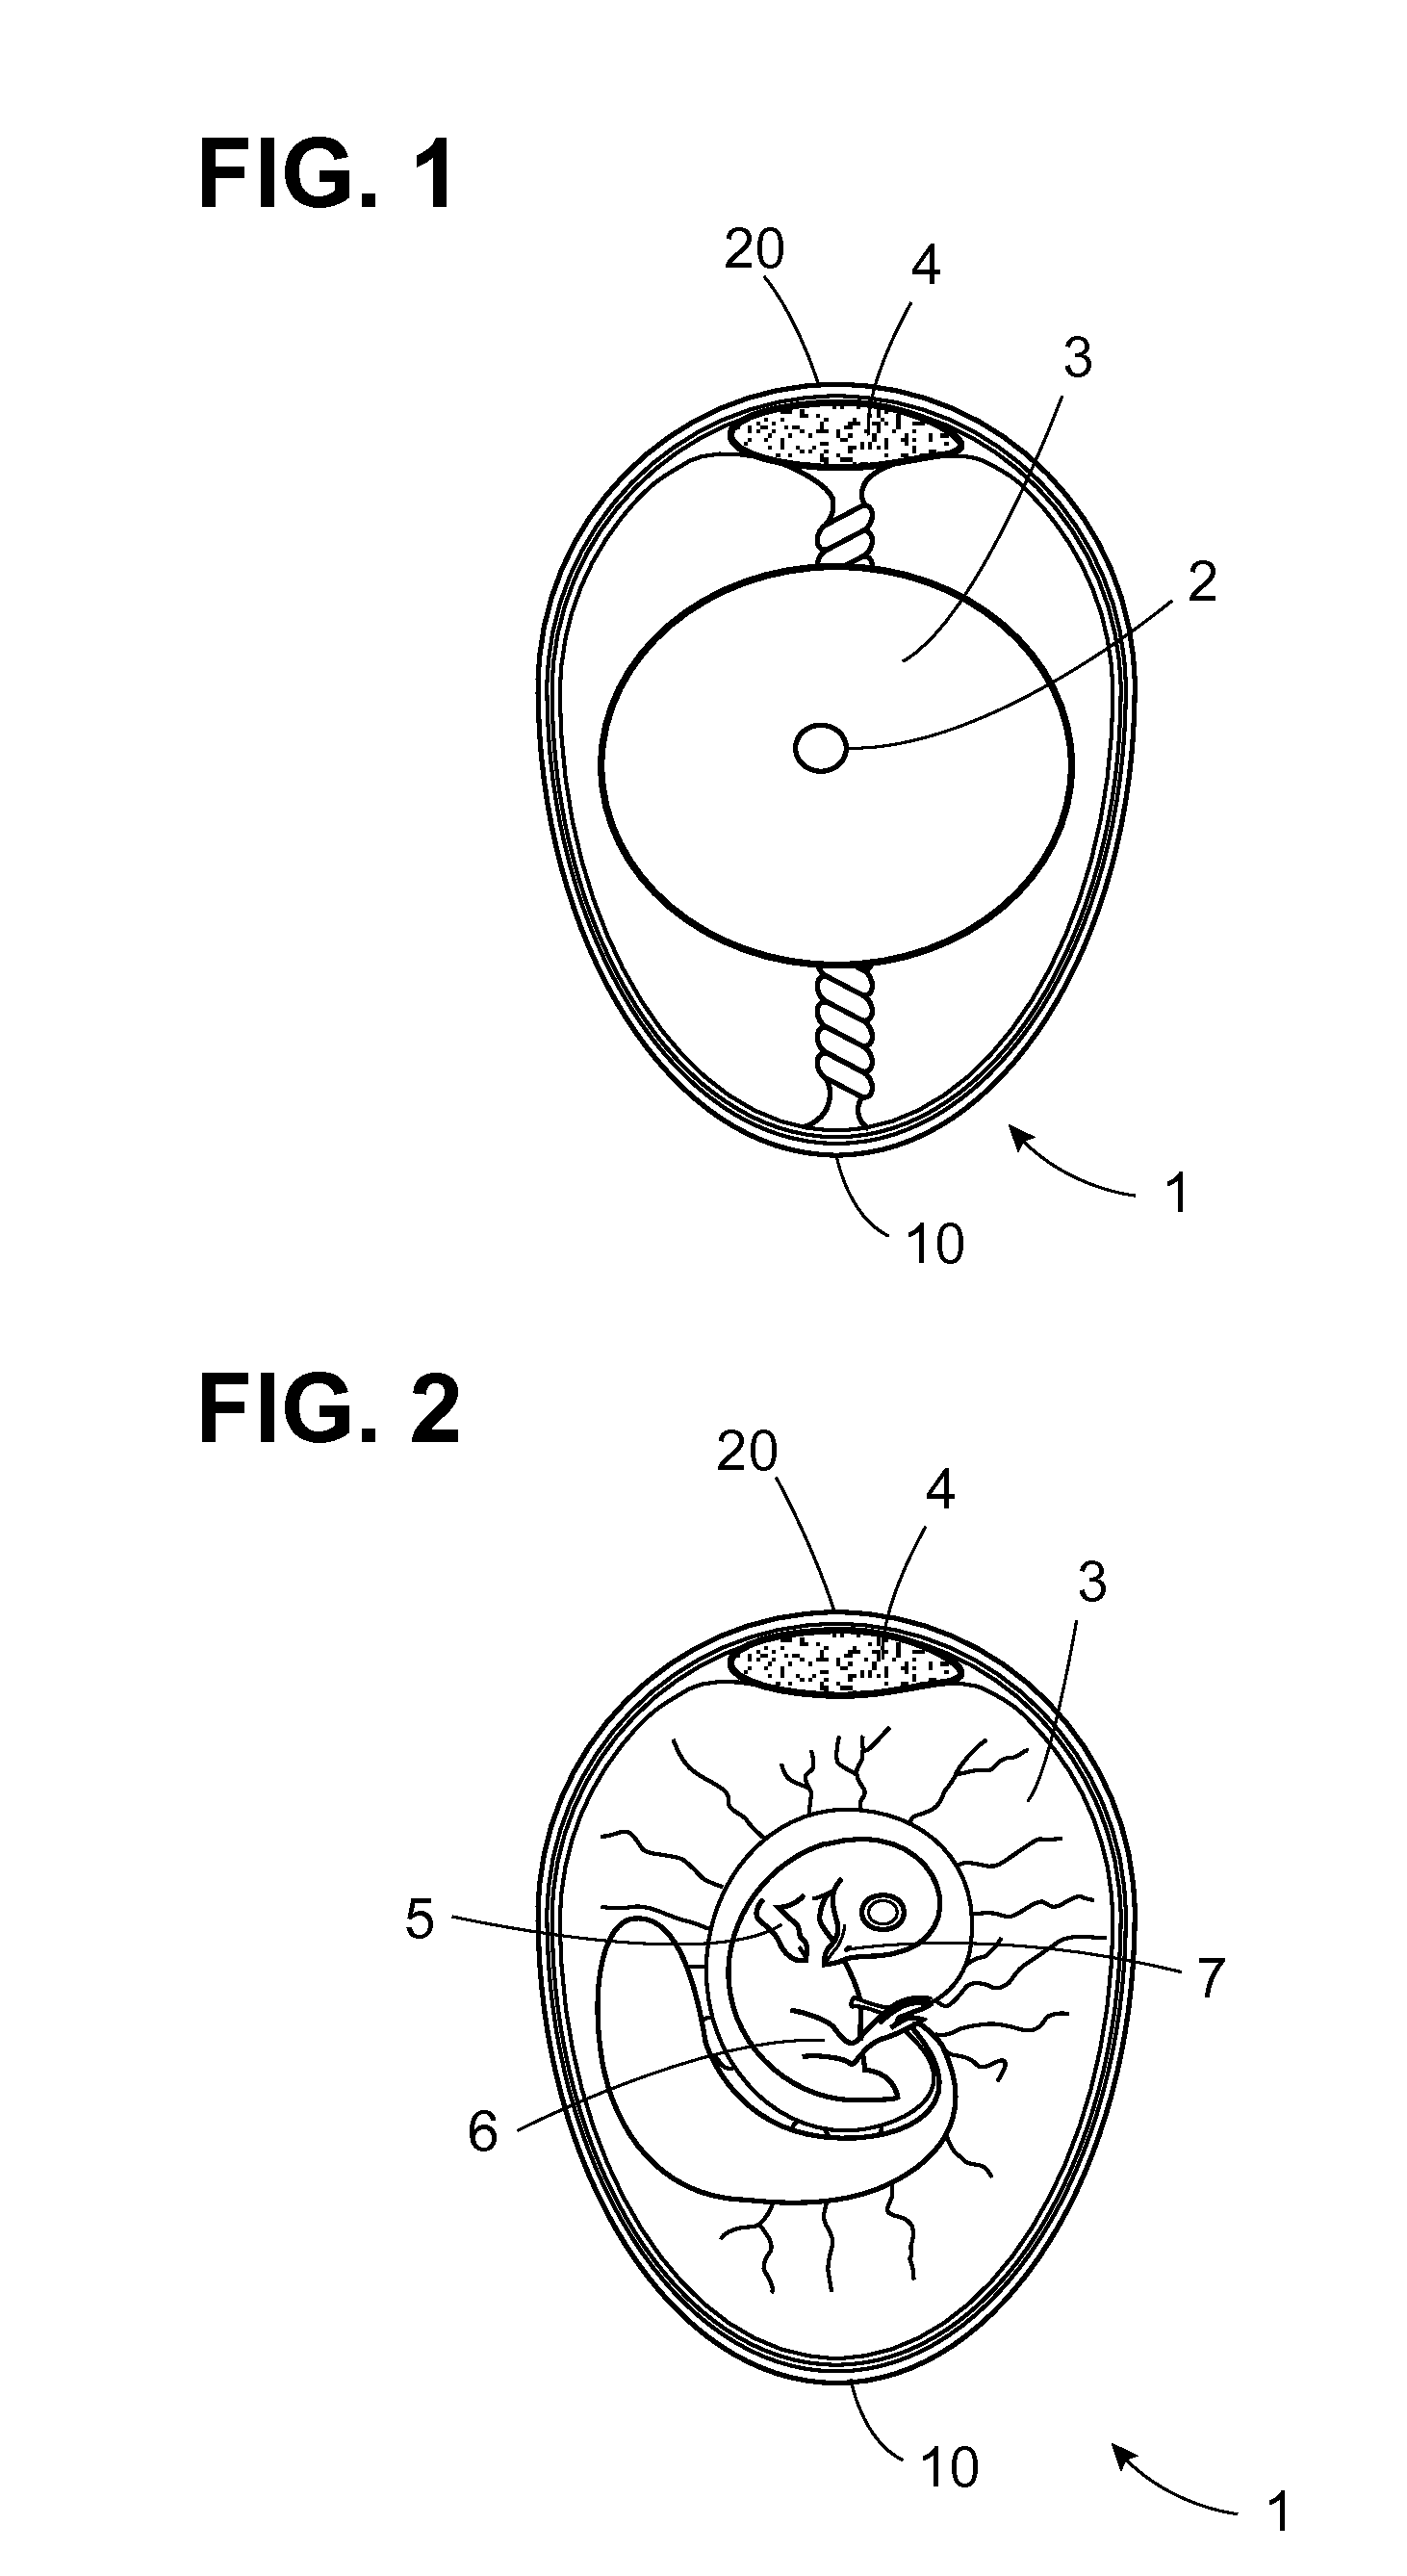 Non-contact egg identification system for determining egg viability, and associated method